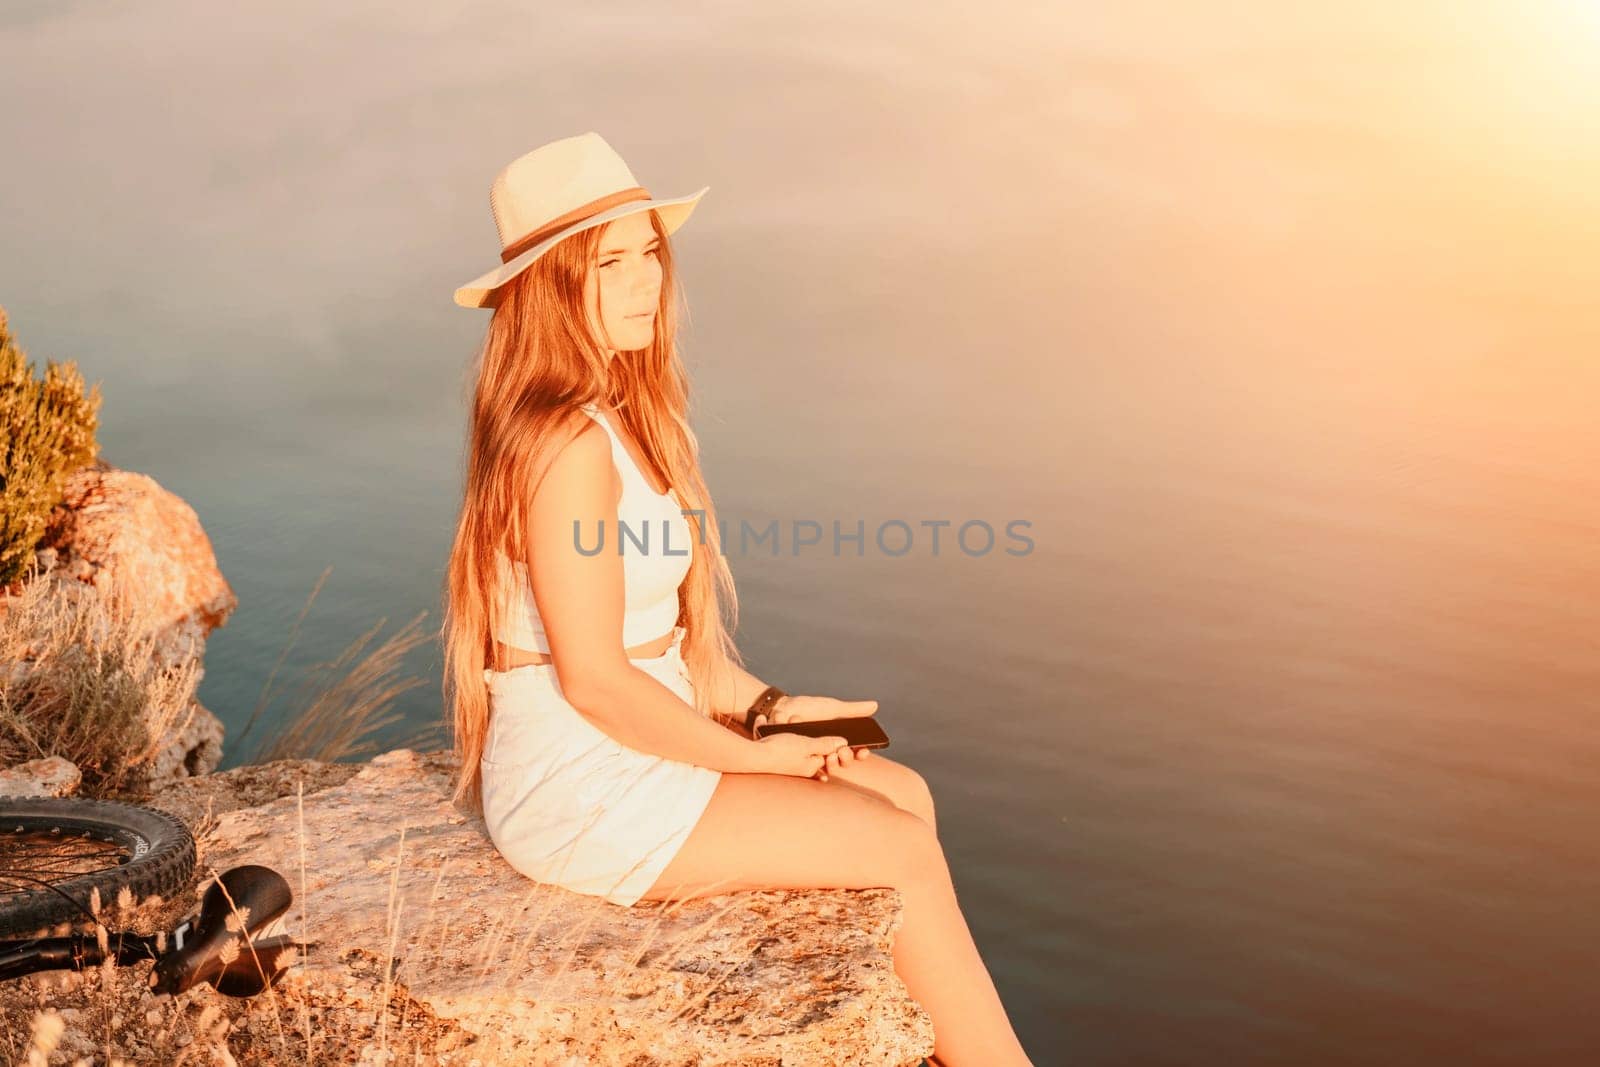 A tourist woman is sitting by the sea in a hat and white summer clothes, looking happy and relaxed